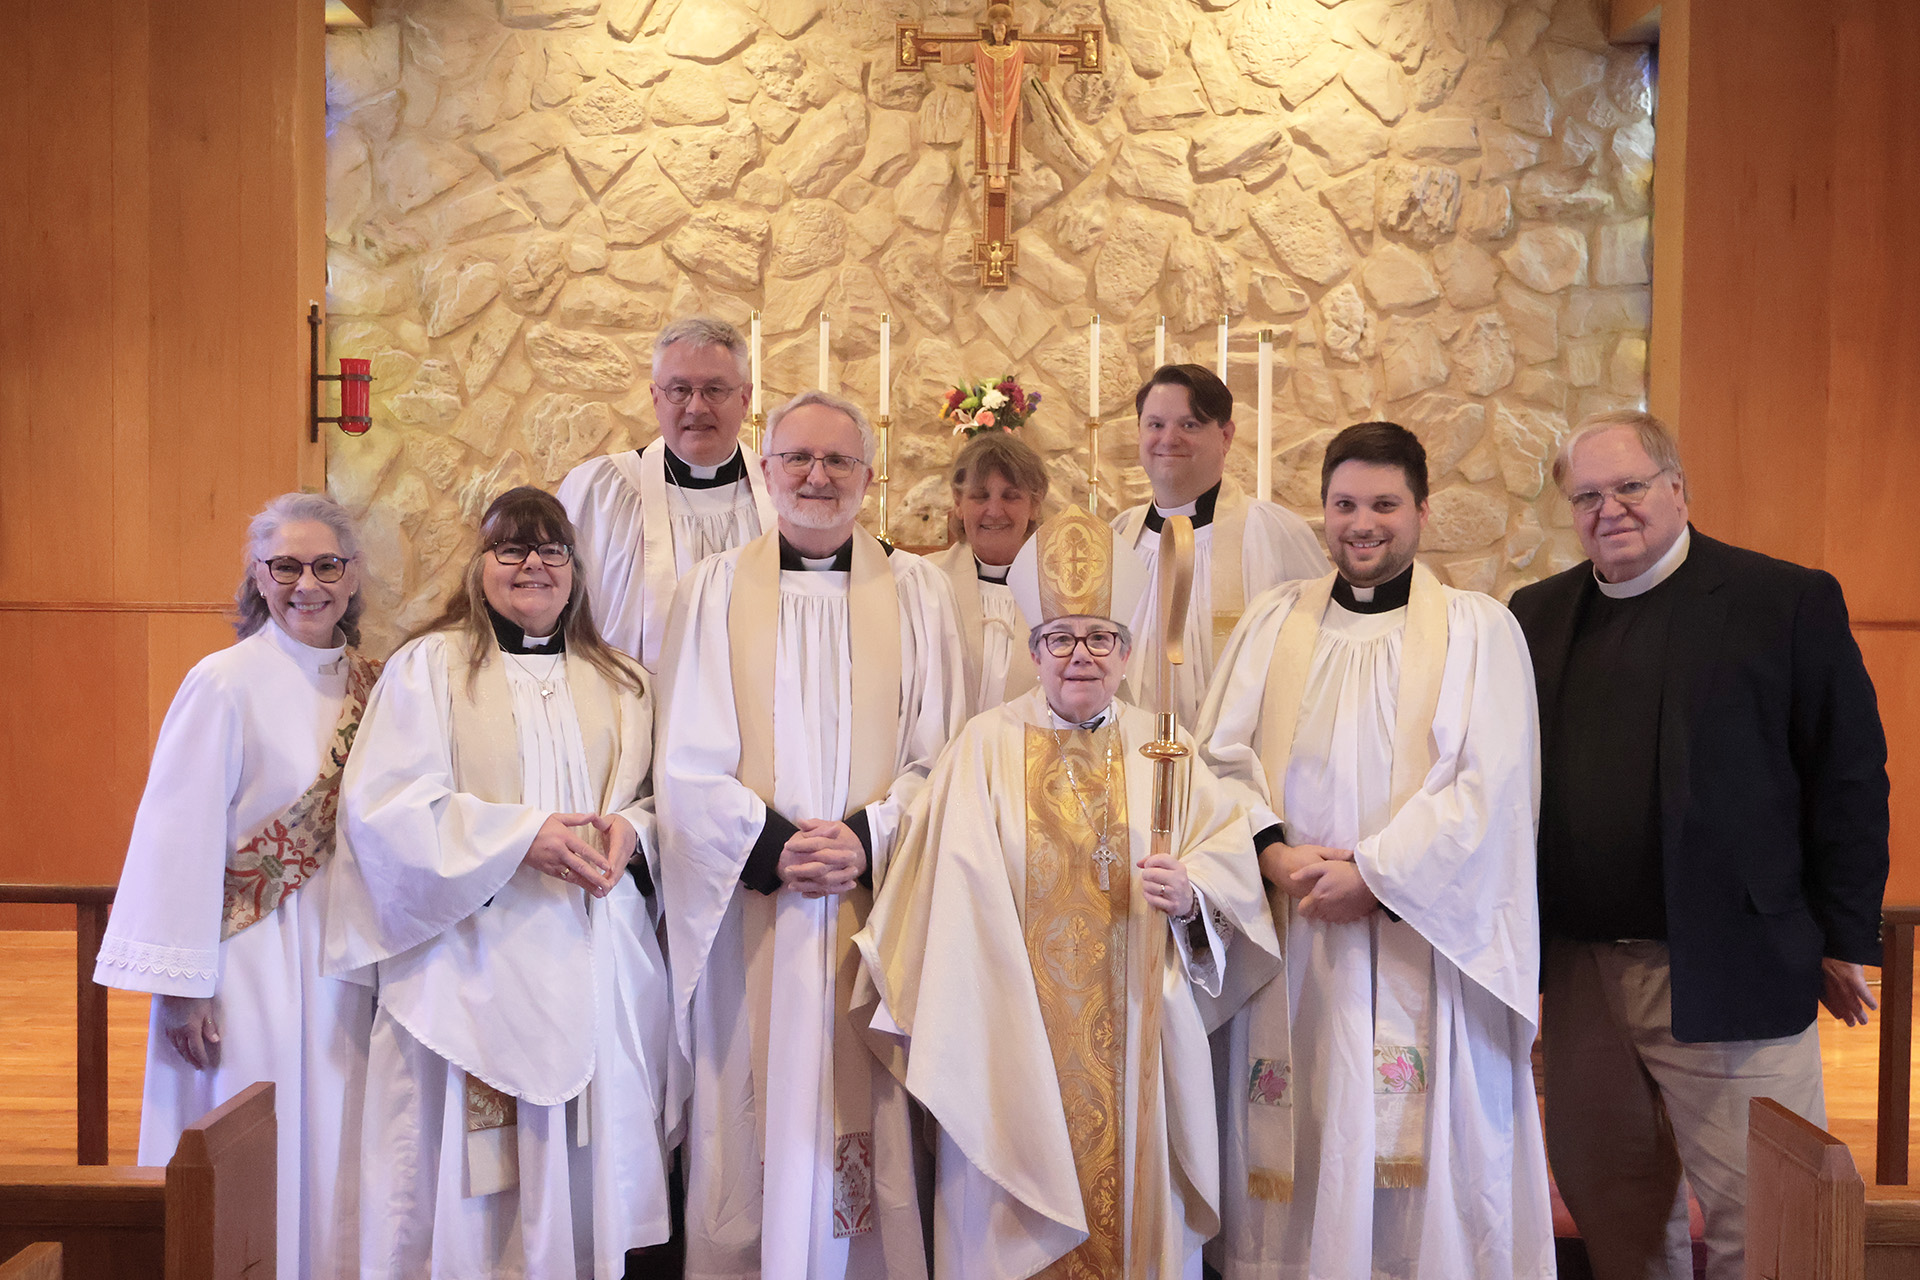 Congratulations to the Rev. Jeffrey Hurst on his Installation as Rector of St. Matthew’s in Raytown!